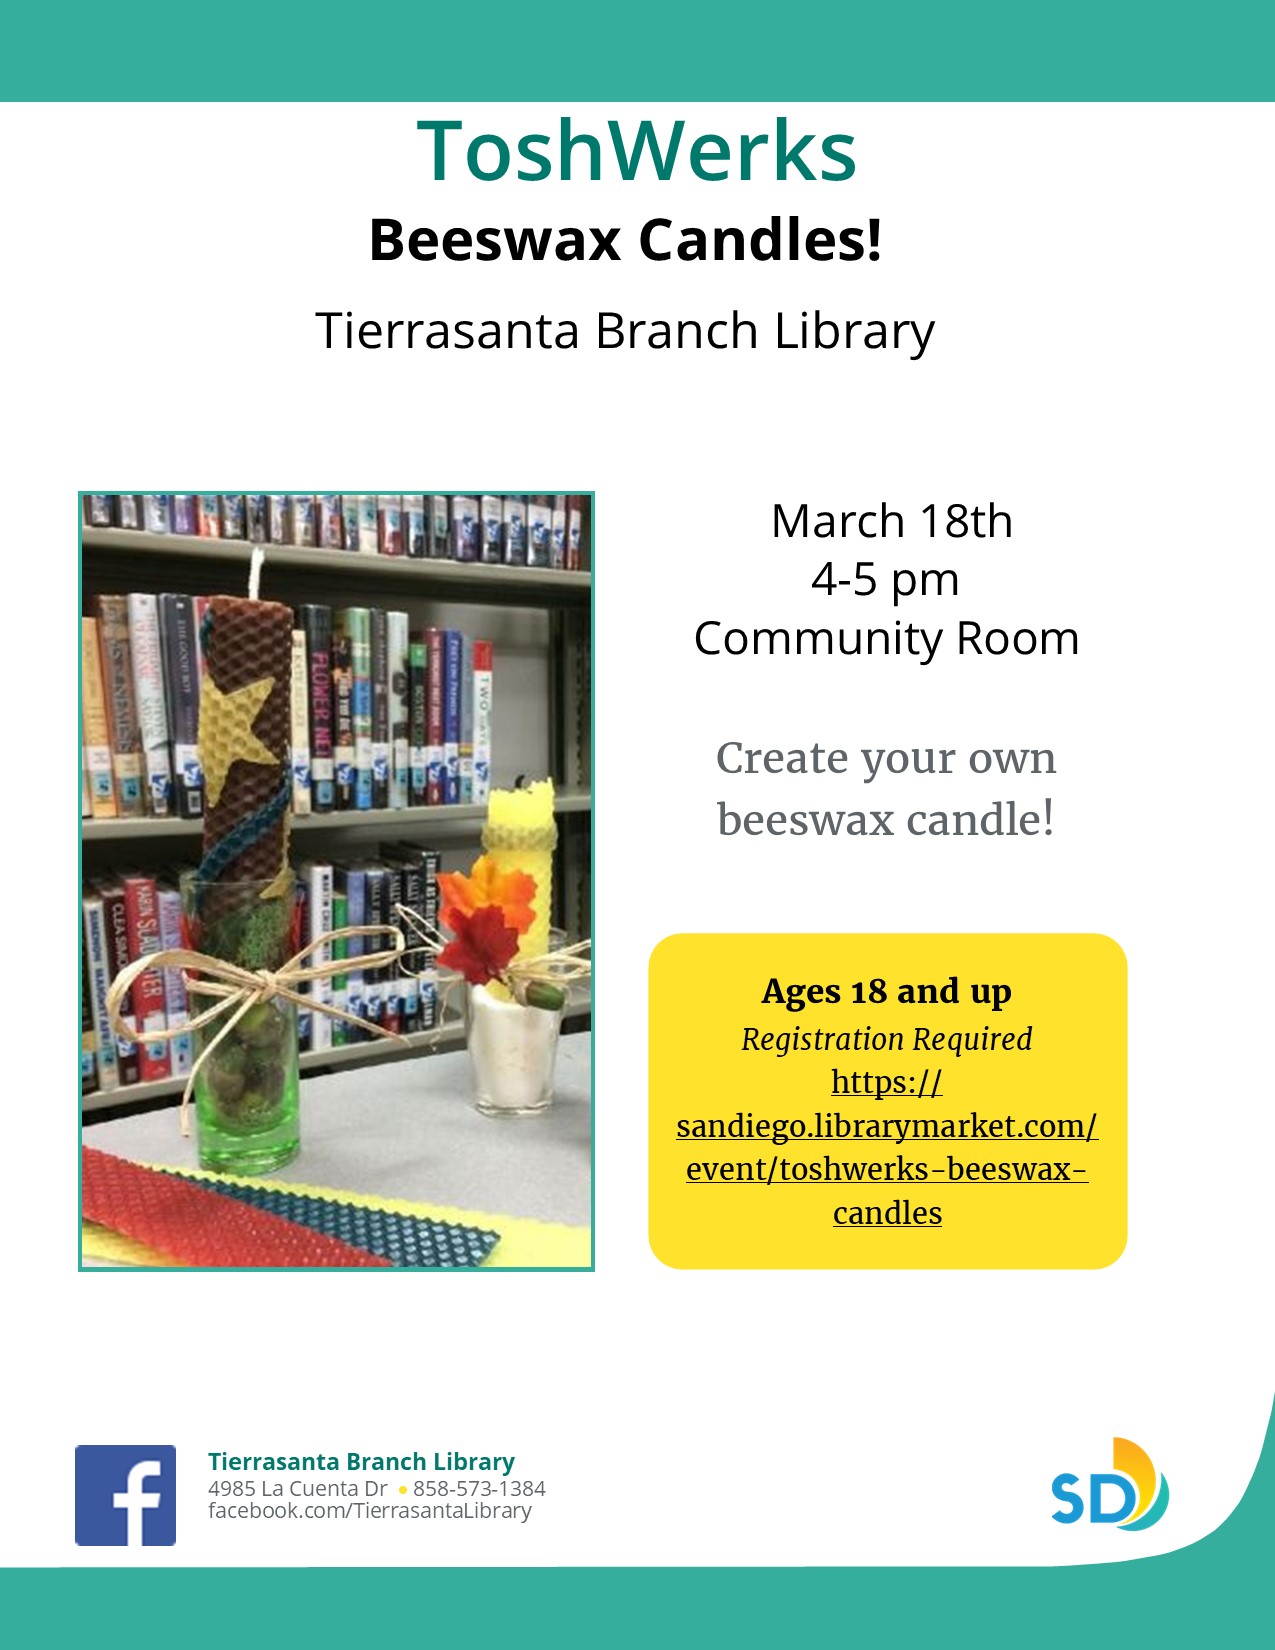 Flyer with the image of a library with beeswax candles on a table